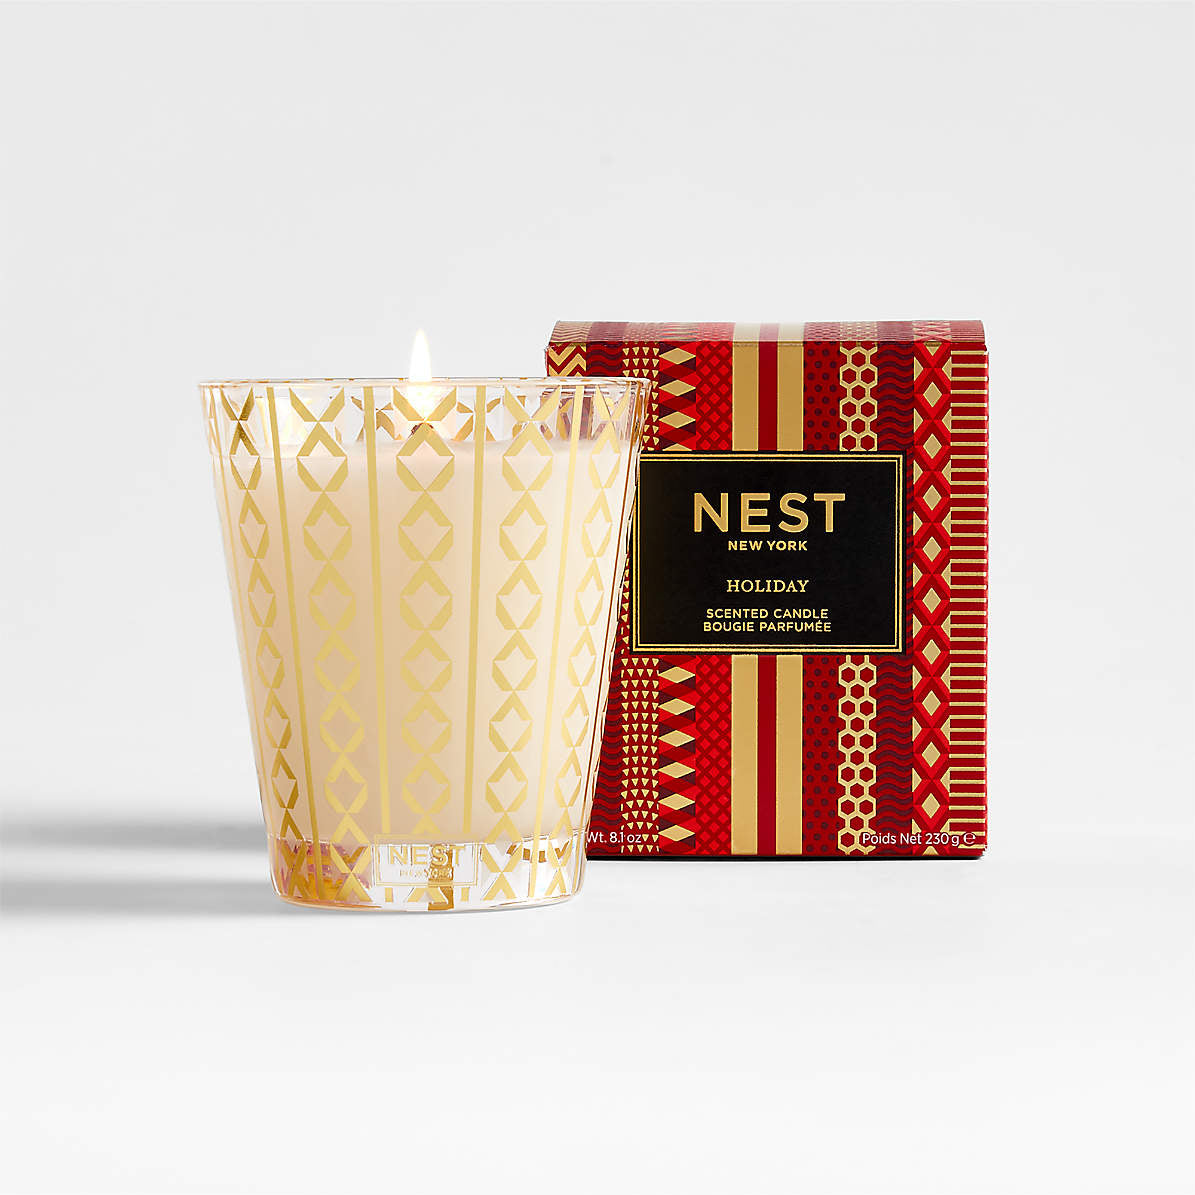 NEST CLASSIC CANDLE